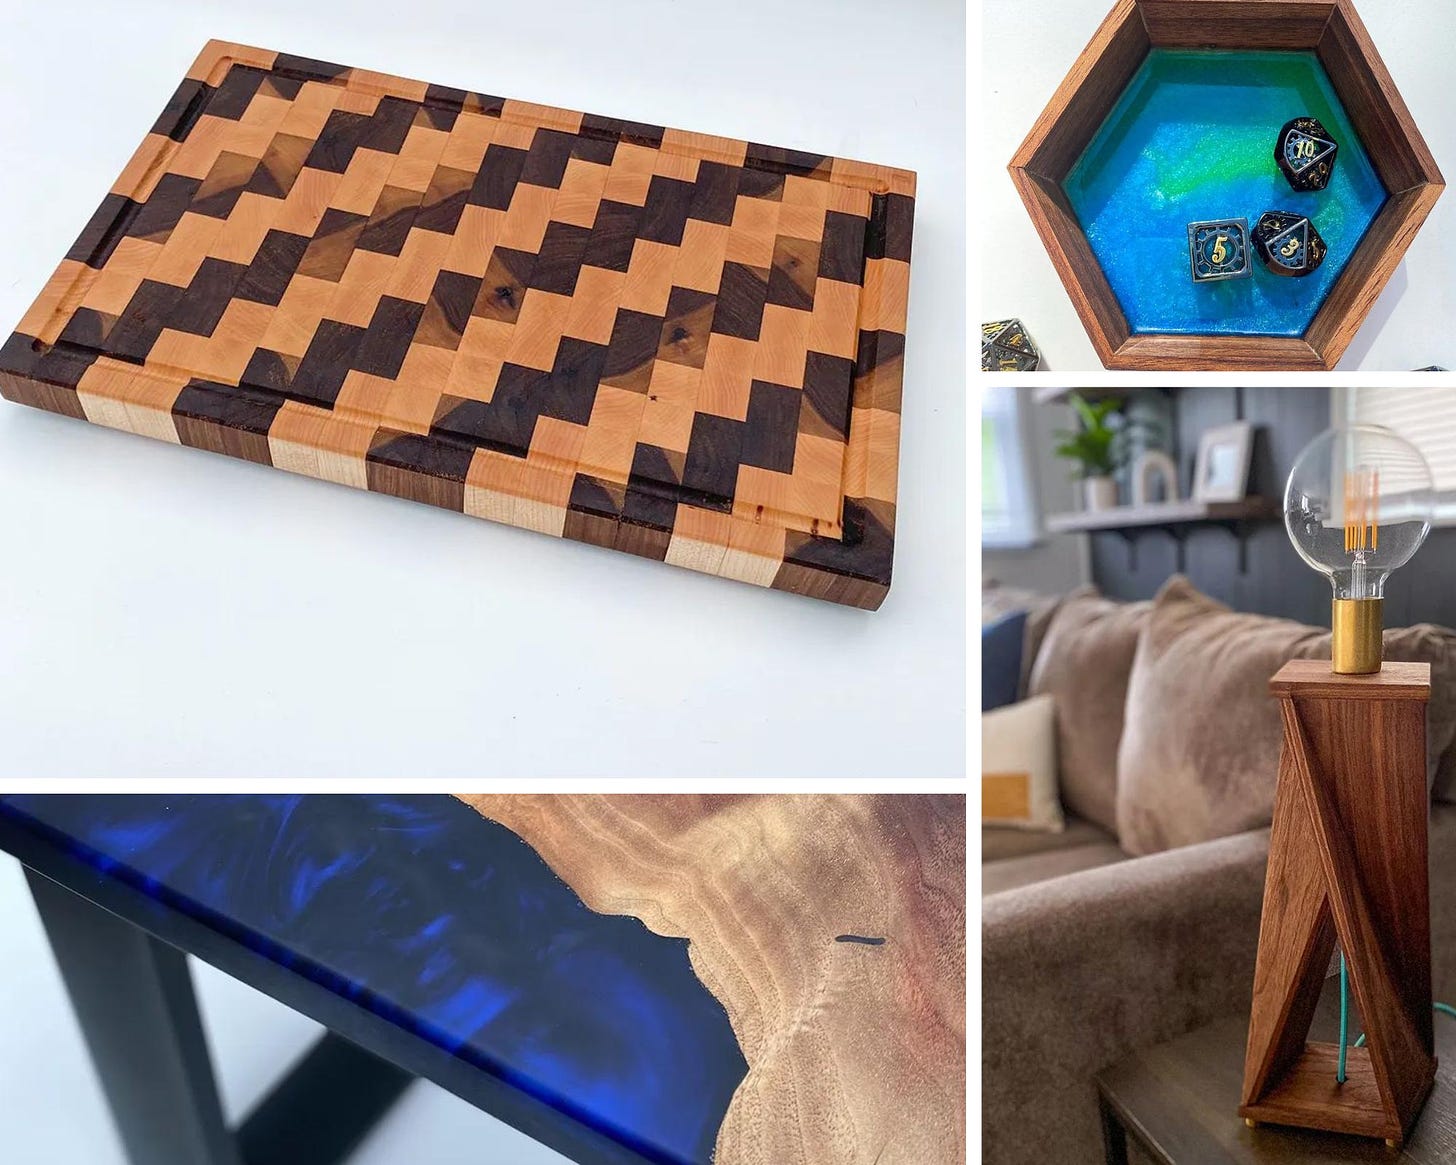 A photo collage of Adam’s work. The photo on the top left is of a cutting board. It’s a larger end-grain design with juice grooves and carved handles. It’s light brown colored and has a repeating zigzag pattern of darker wood. The top photo on the right is of a hexagonal epoxy and mahogany Dungeons and Dragons dice tray. It’s taken from above and features a glittery blue green bottom. In the photo on the bottom right, you see a black walnut lamp with an exposed Edison bulb, brass accents, and a teal cord. It rests on a dark wooden coffee teal beside a tan couch in a living room. The photo on the right is a close up of a table featuring a deep blue epoxy edge and a black metal table leg. 